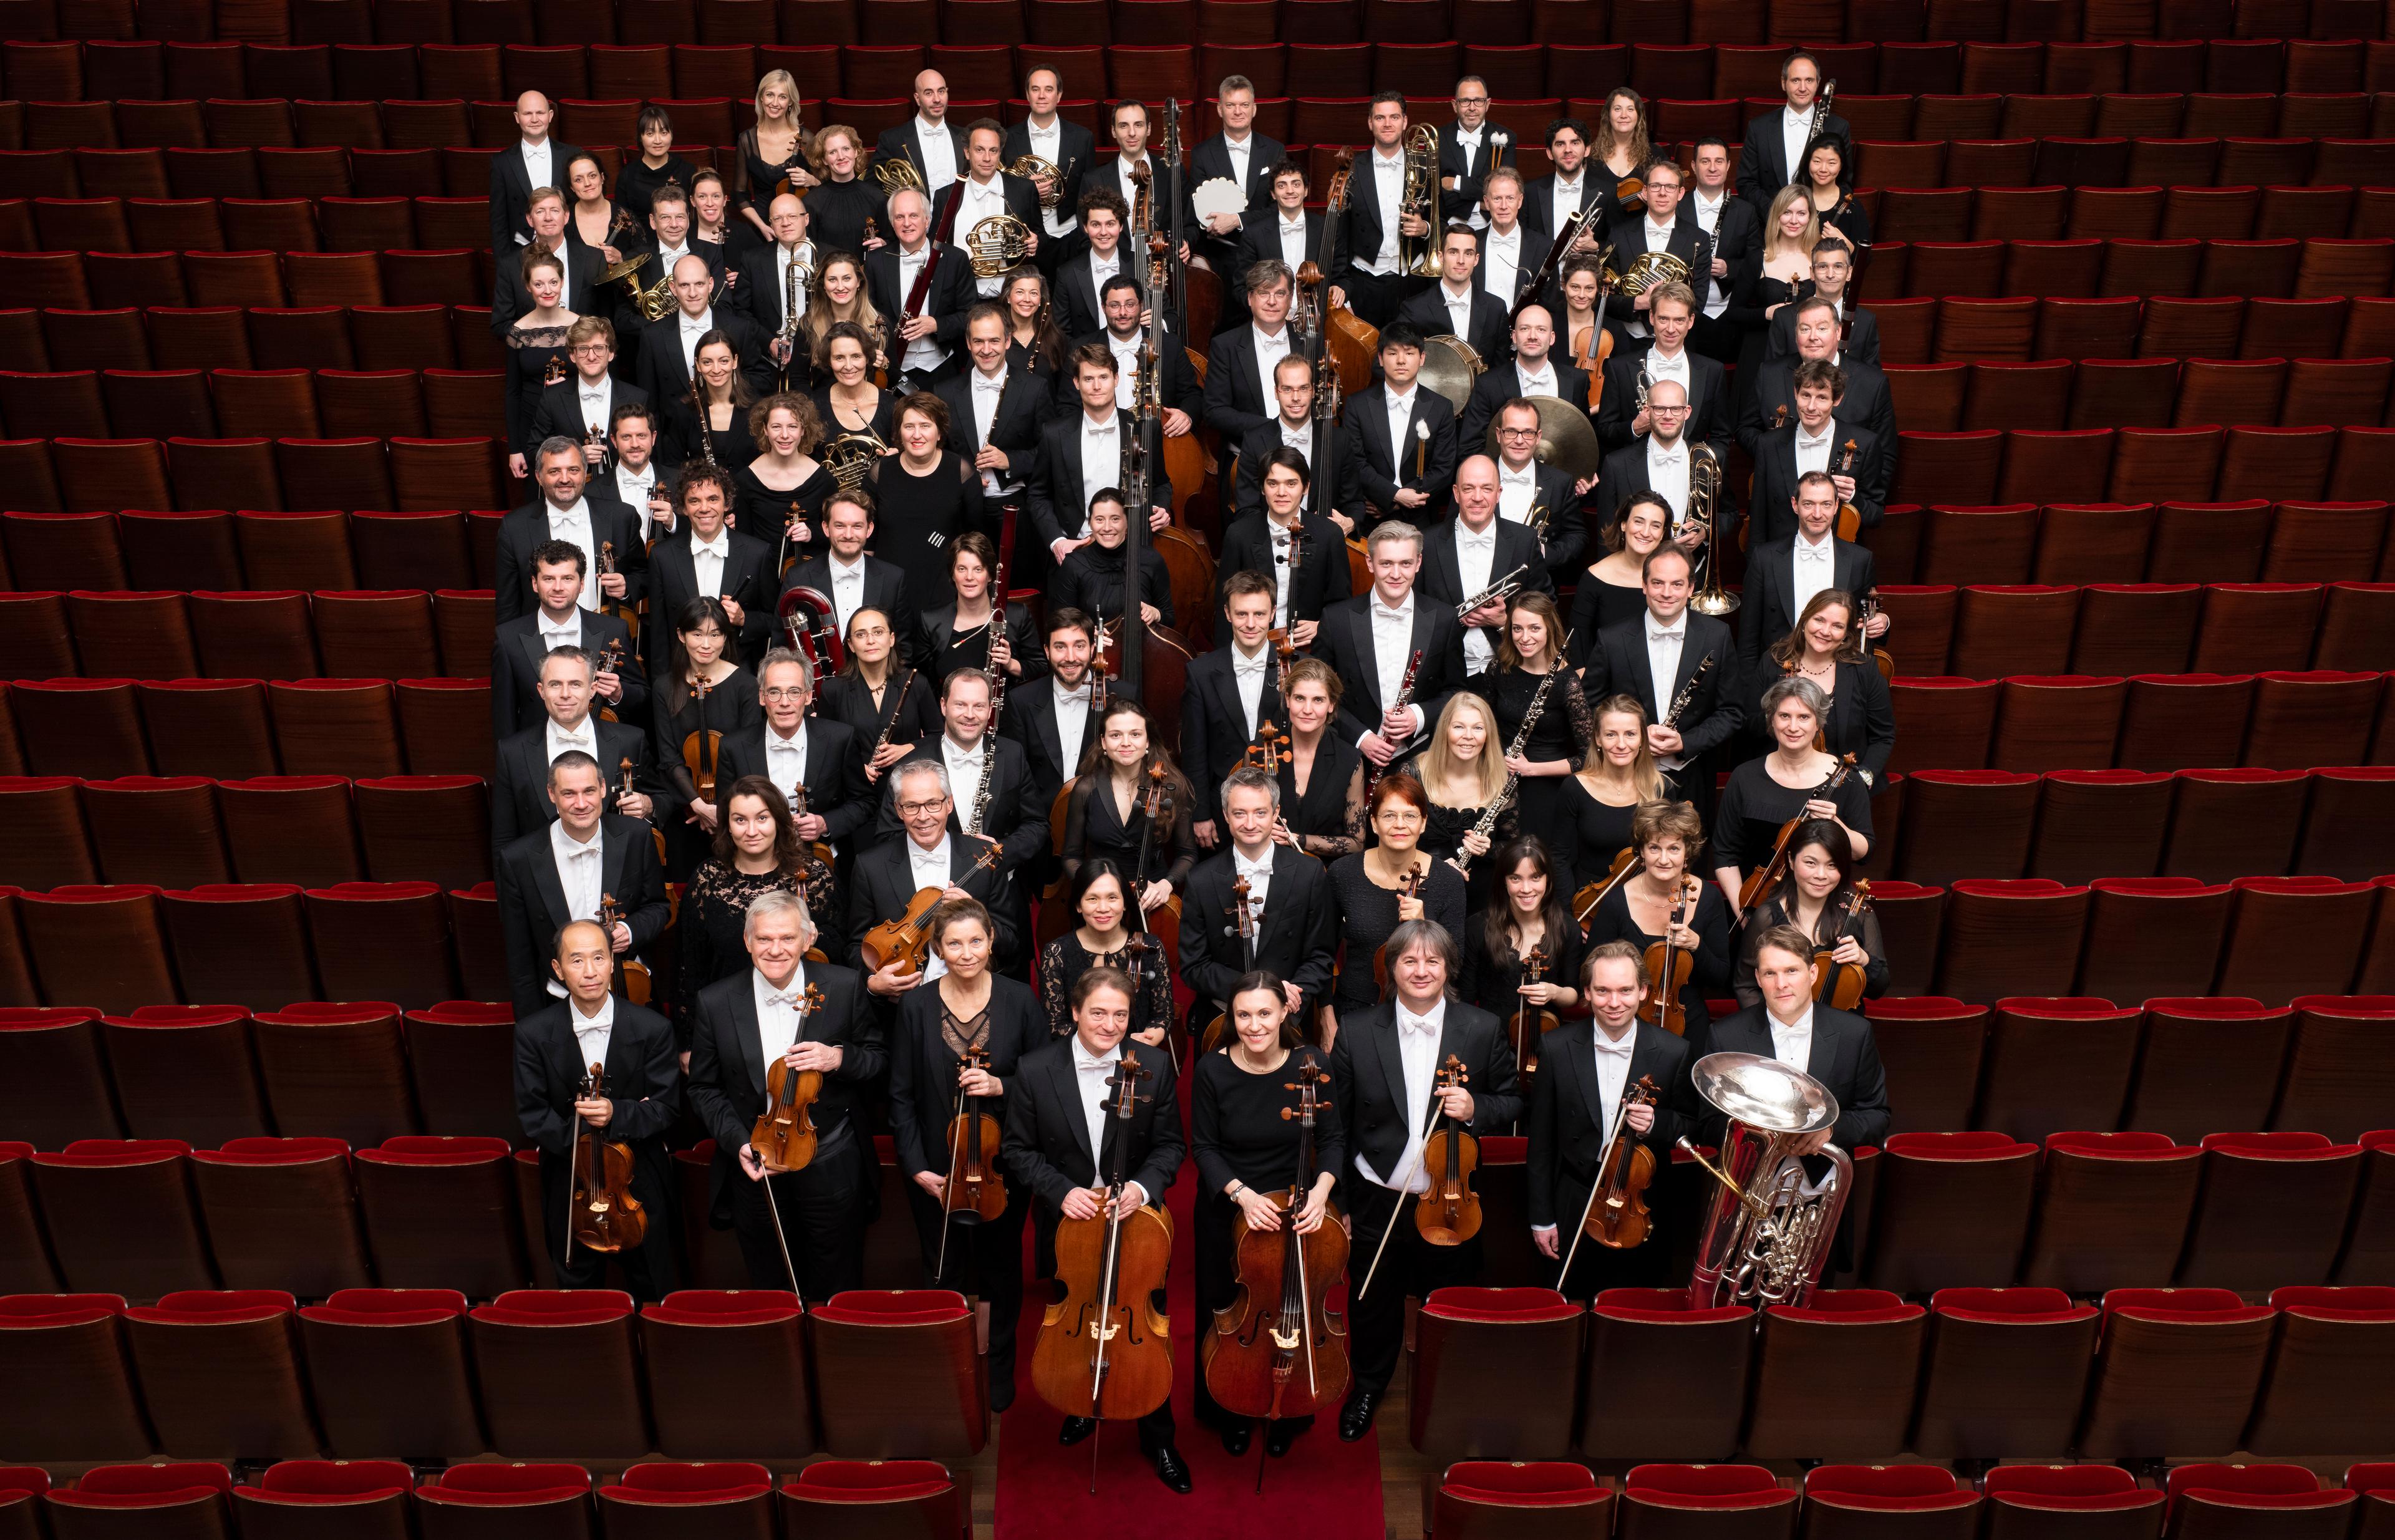 Royal Concertgebouw Orchestra standing together with their instruments